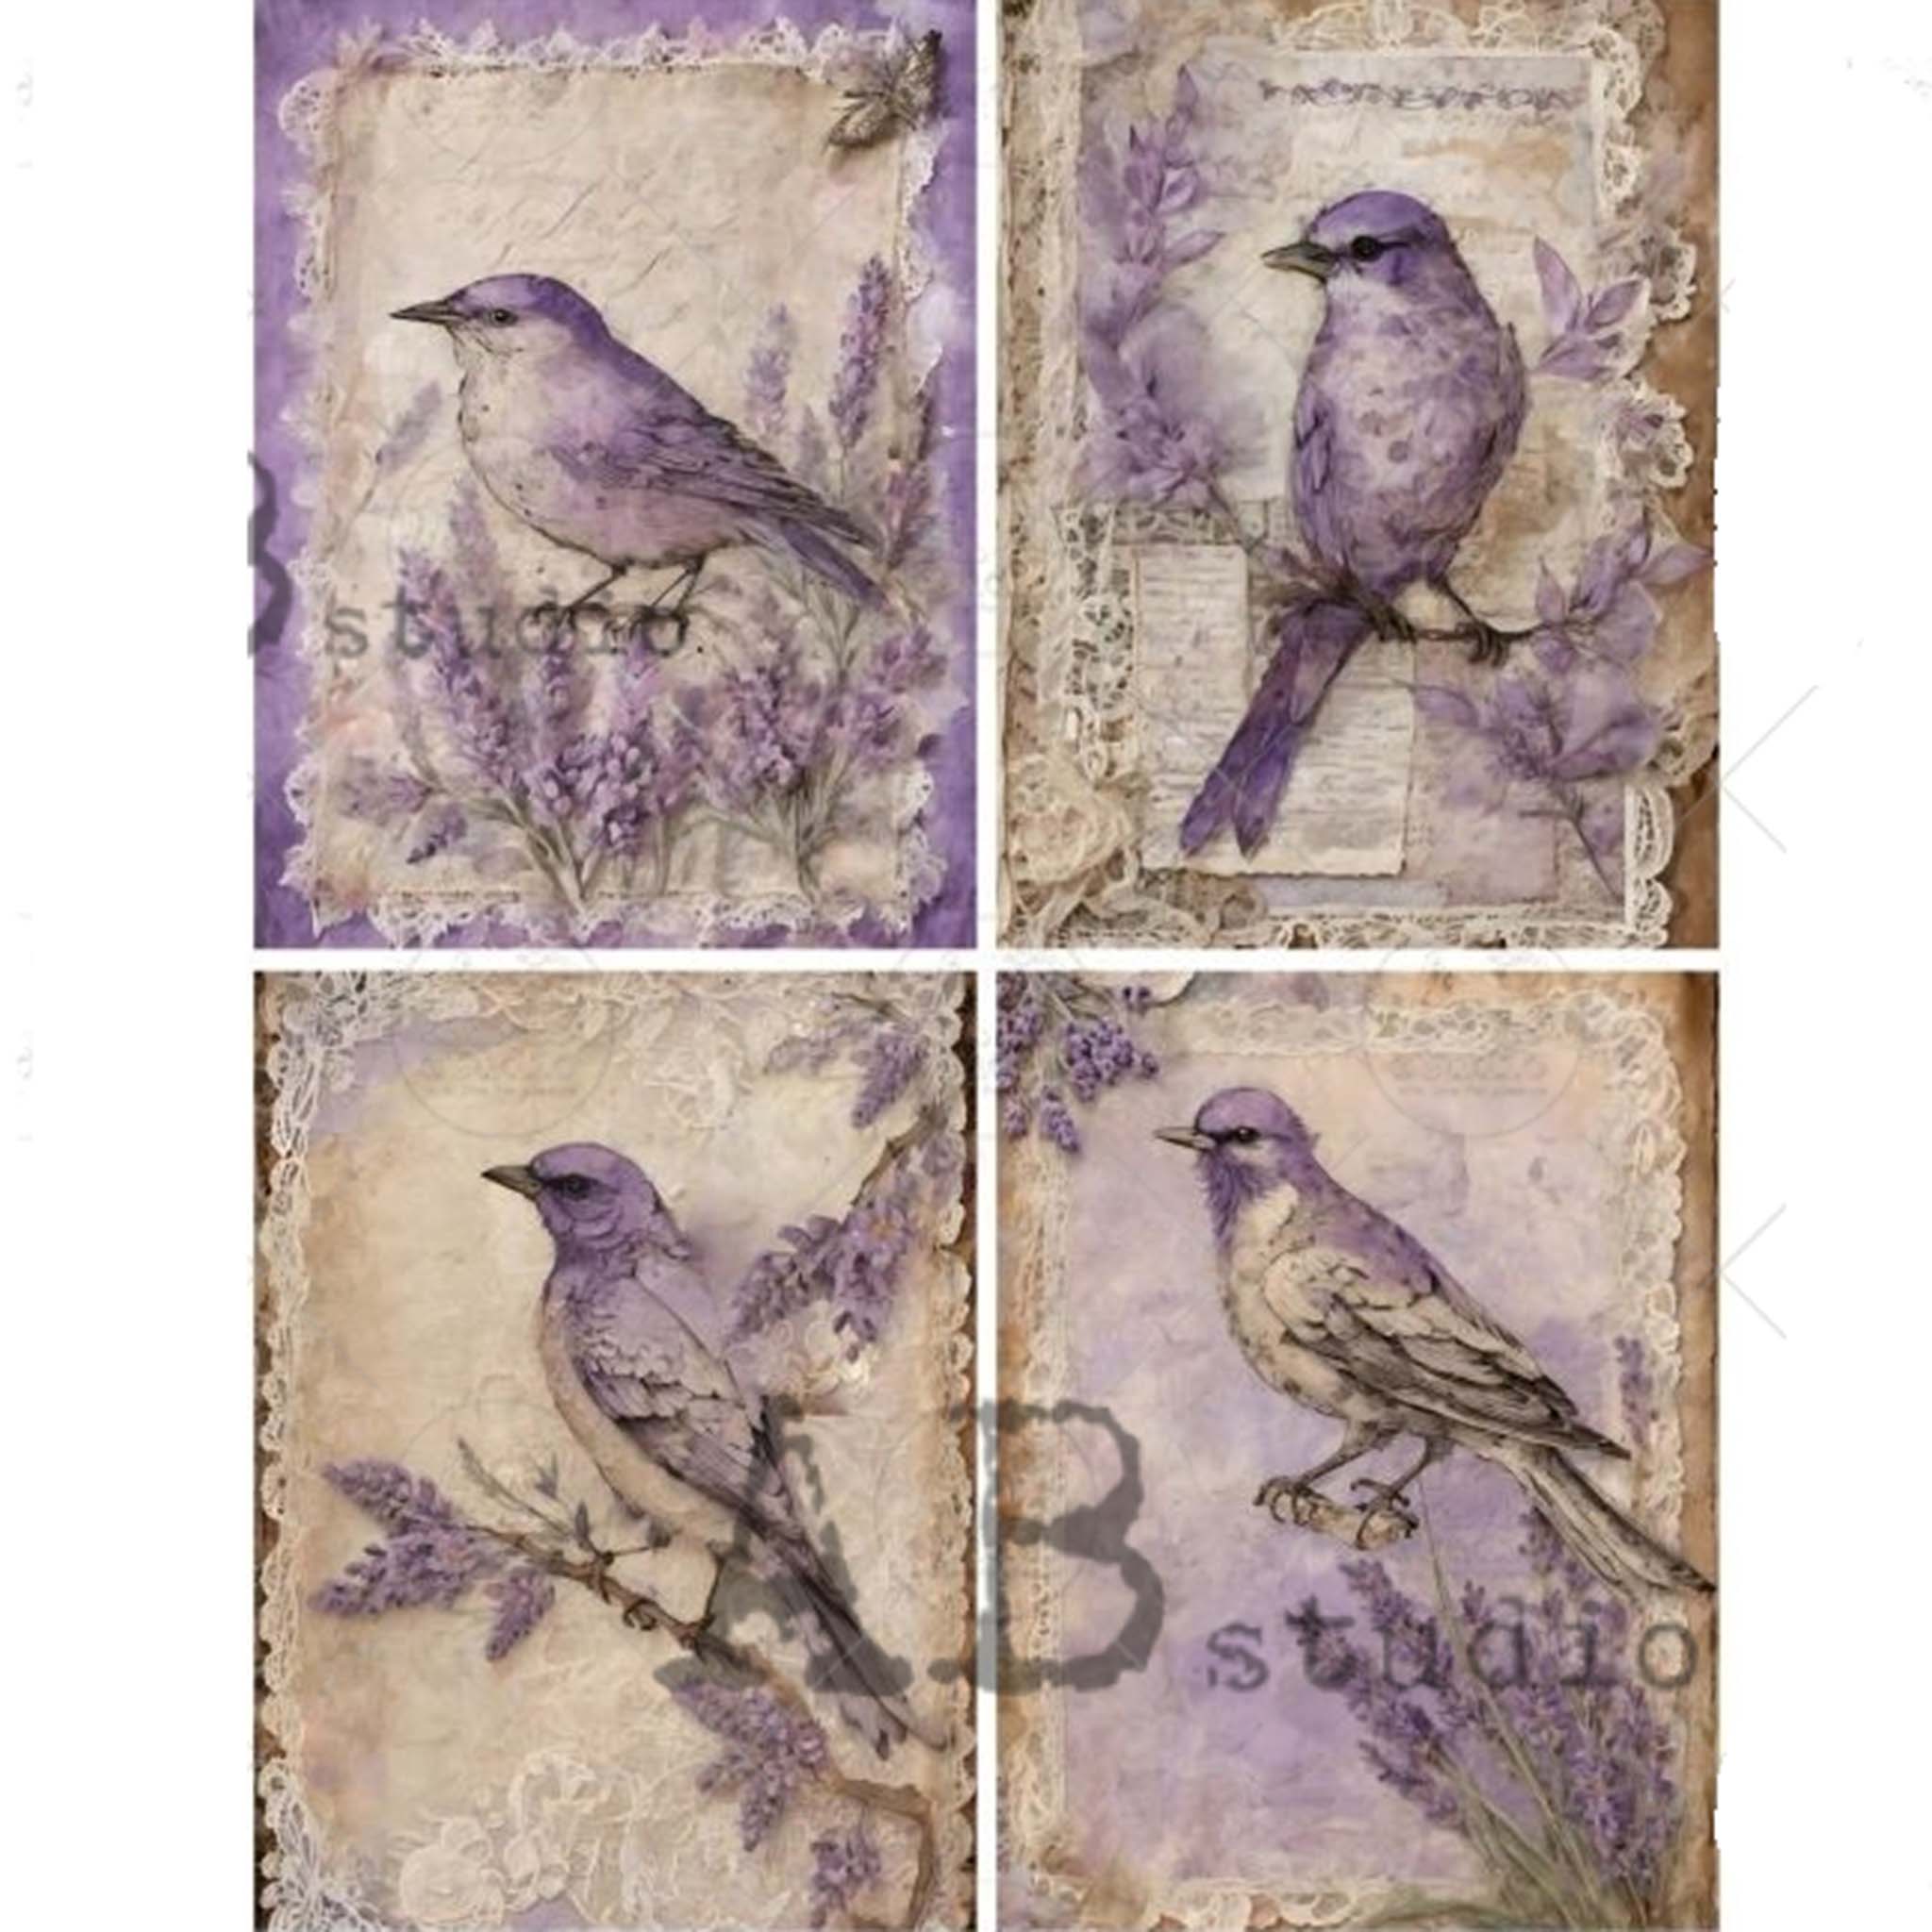 A4 rice paper design that features 4 designs of small birds with delicate lavender sprigs is against a white background.